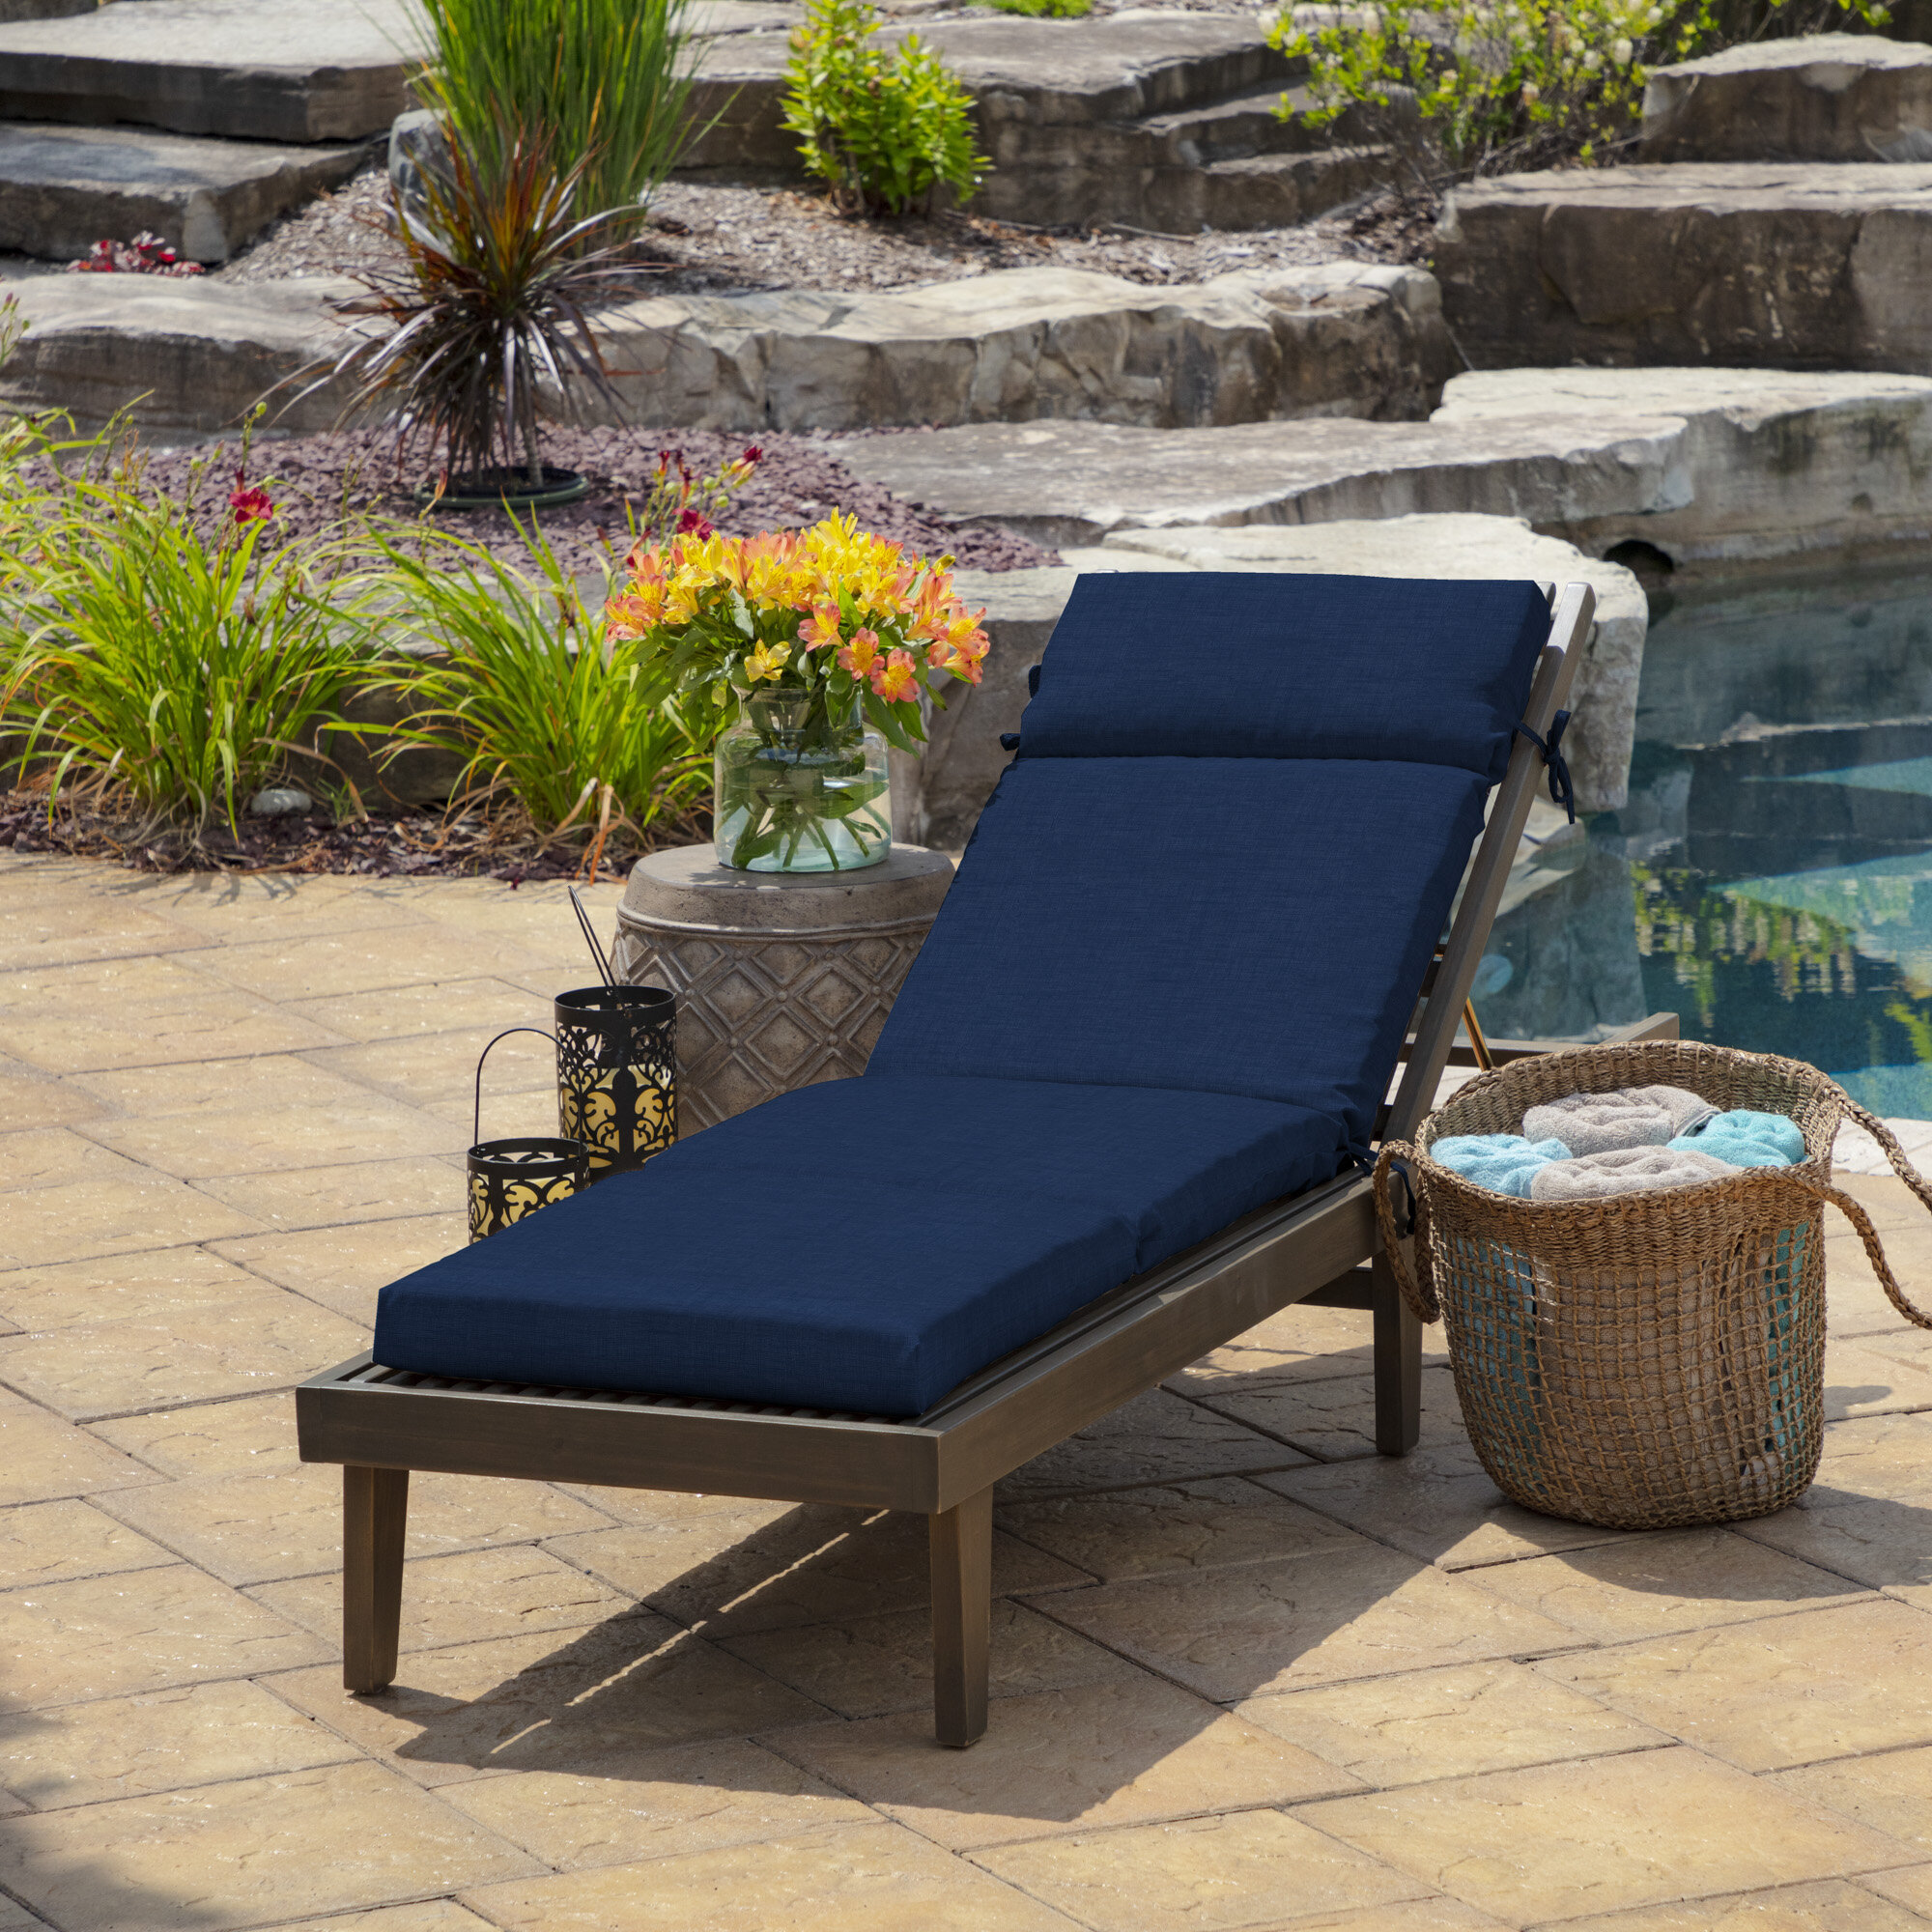 Chaise Lounge Chair Cushion 72 Tufted Padded Outdoor Patio Pillow Deck  Pool Tan